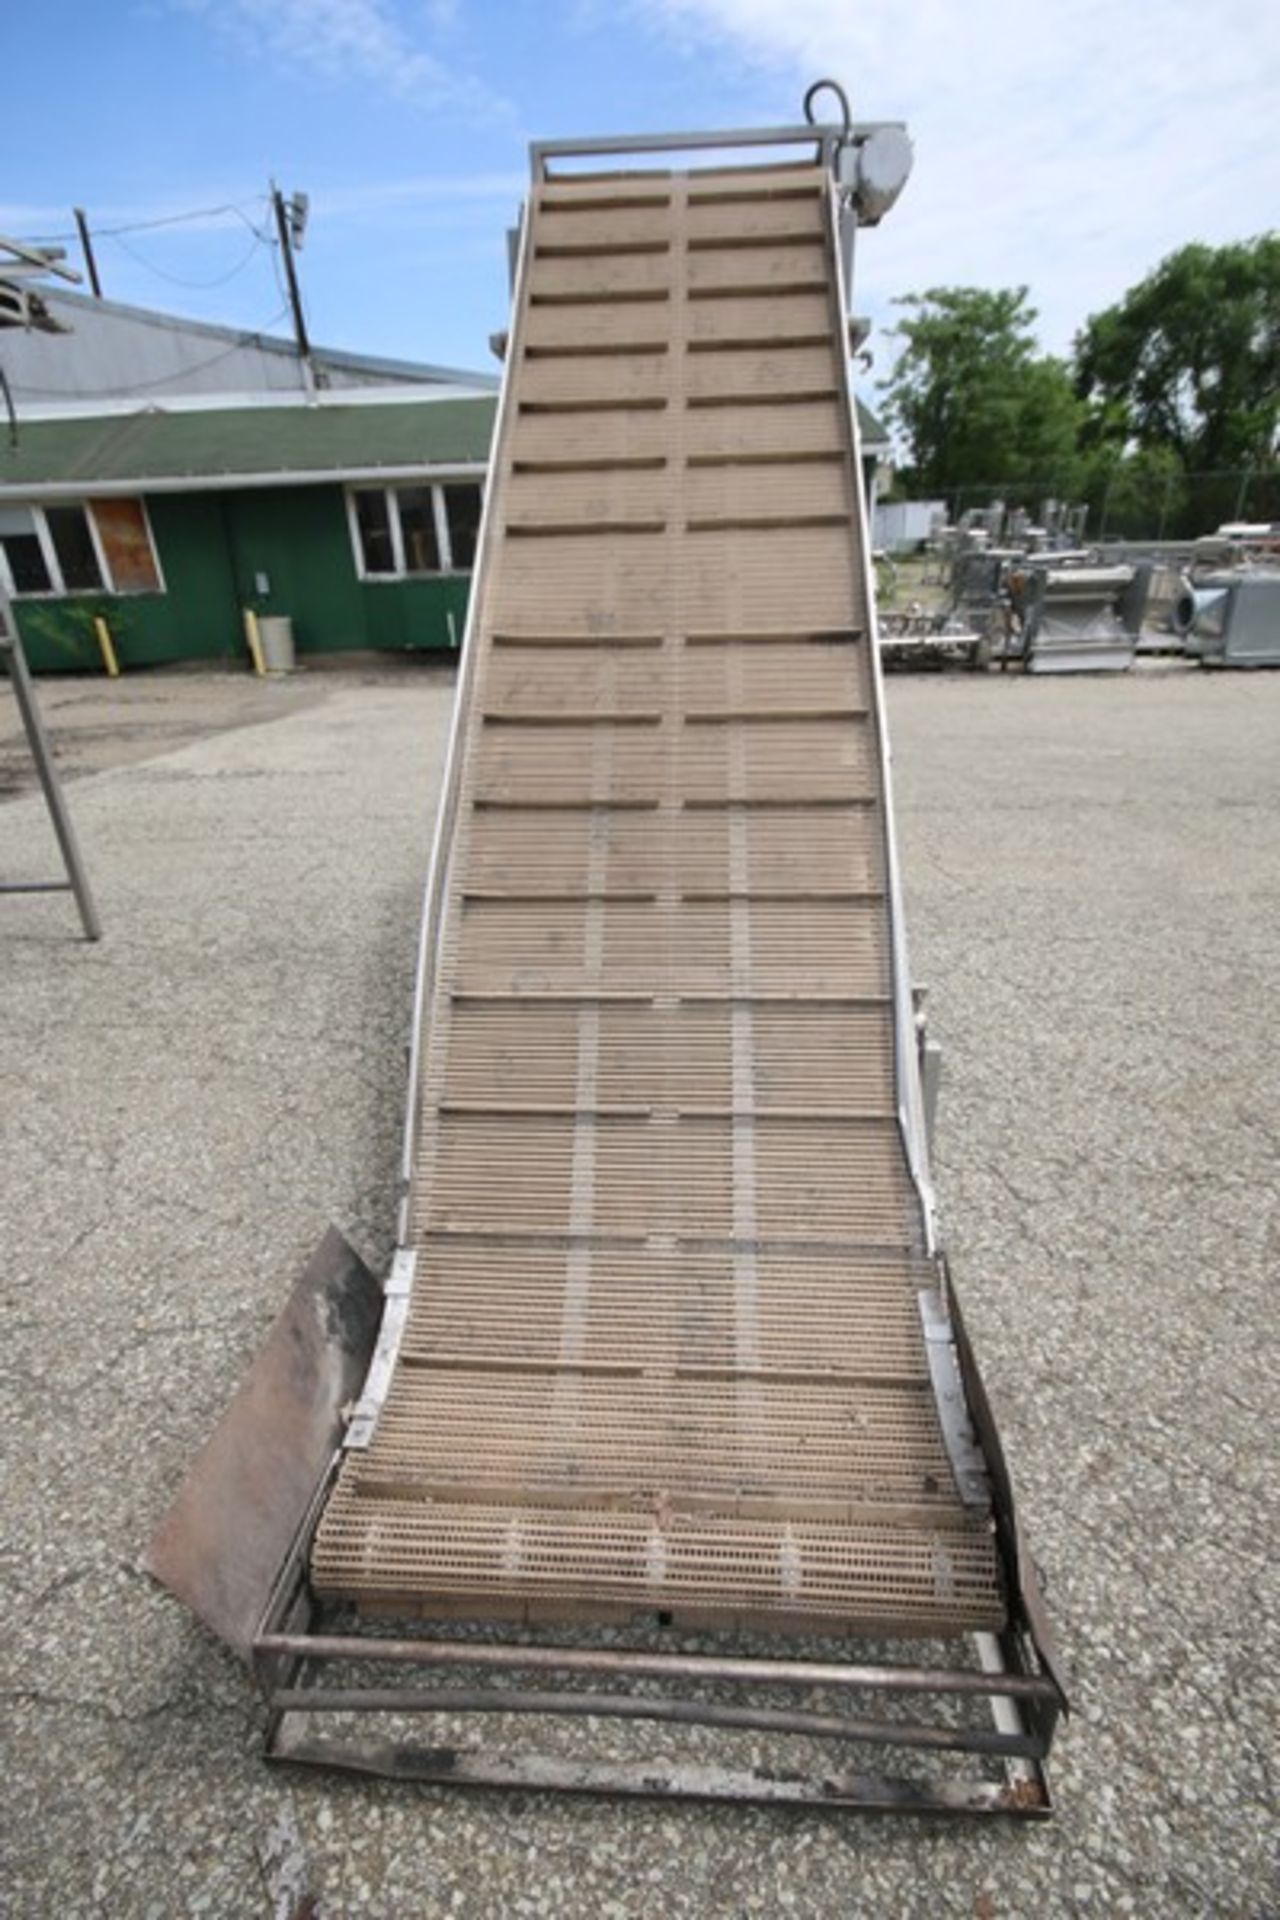 Aprox. 13' L x 36" W x 104" H S/S Inclined Conveyor with Intralox Type Belt with 8.5" Divider - Image 2 of 5